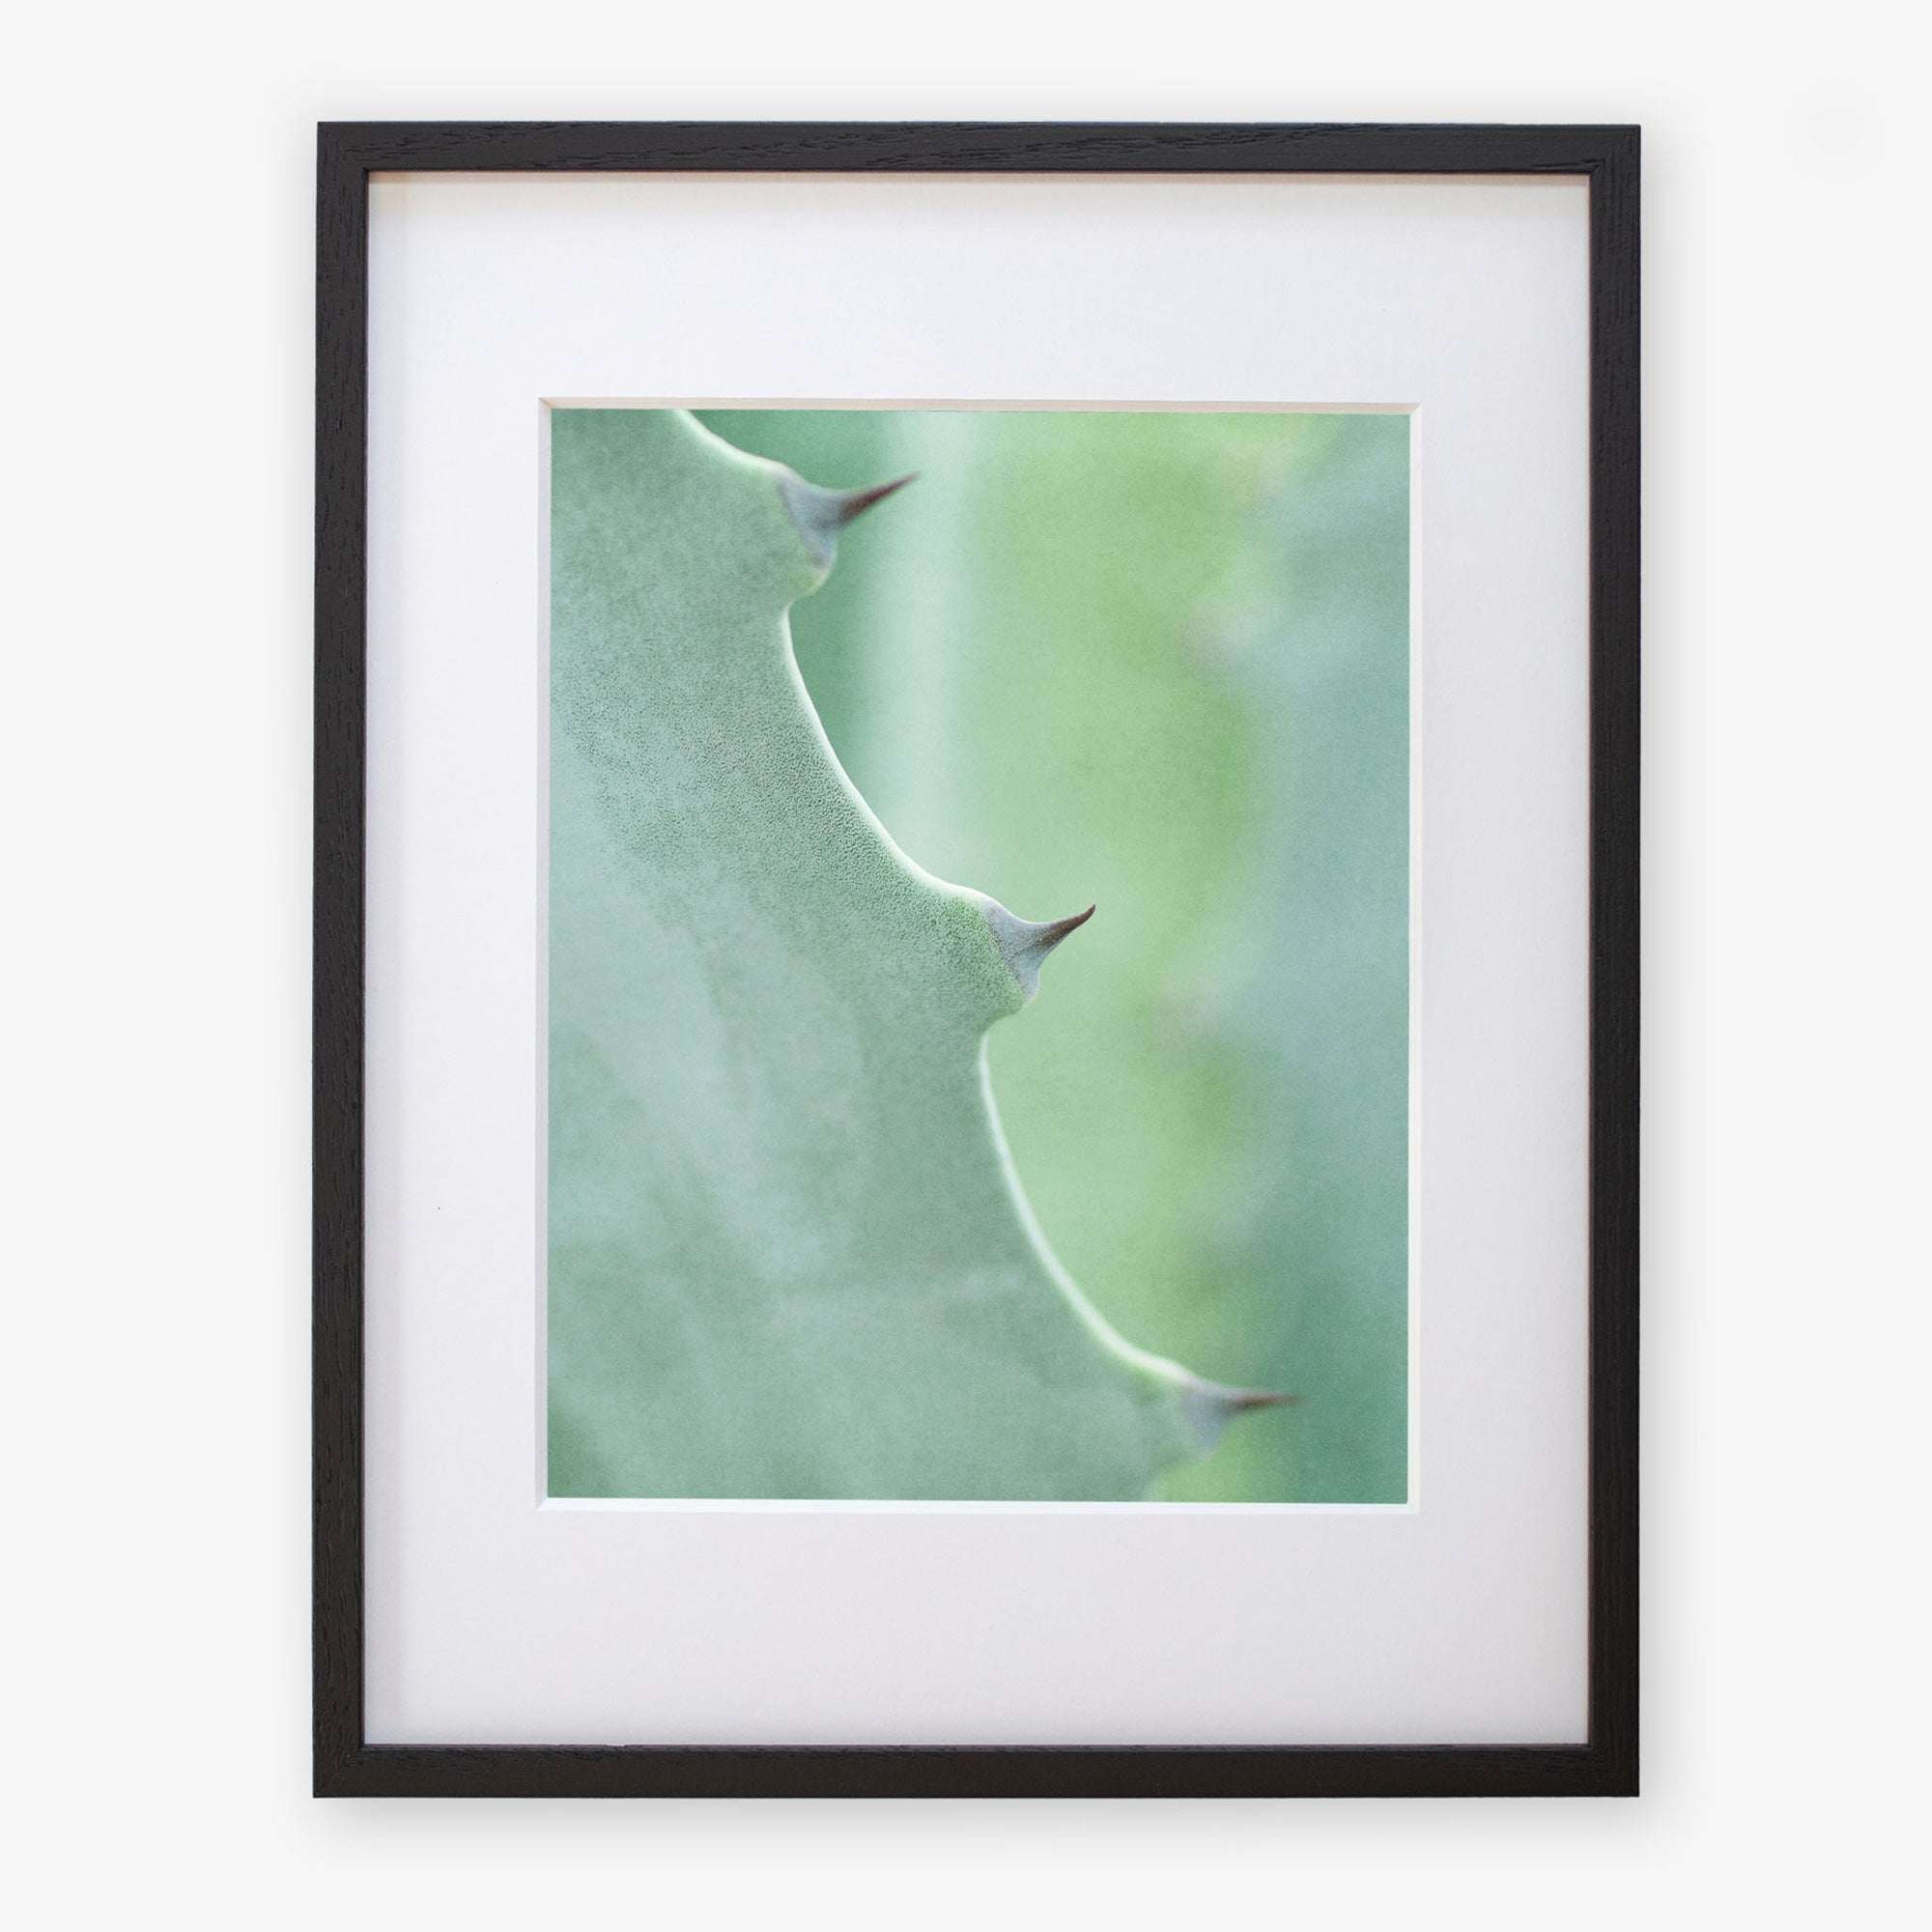 Close-up photograph of a Green Botanical Print, &#39;Aloe Vera Spikes II&#39; by Offley Green, printed on archival photographic paper, against a white background.